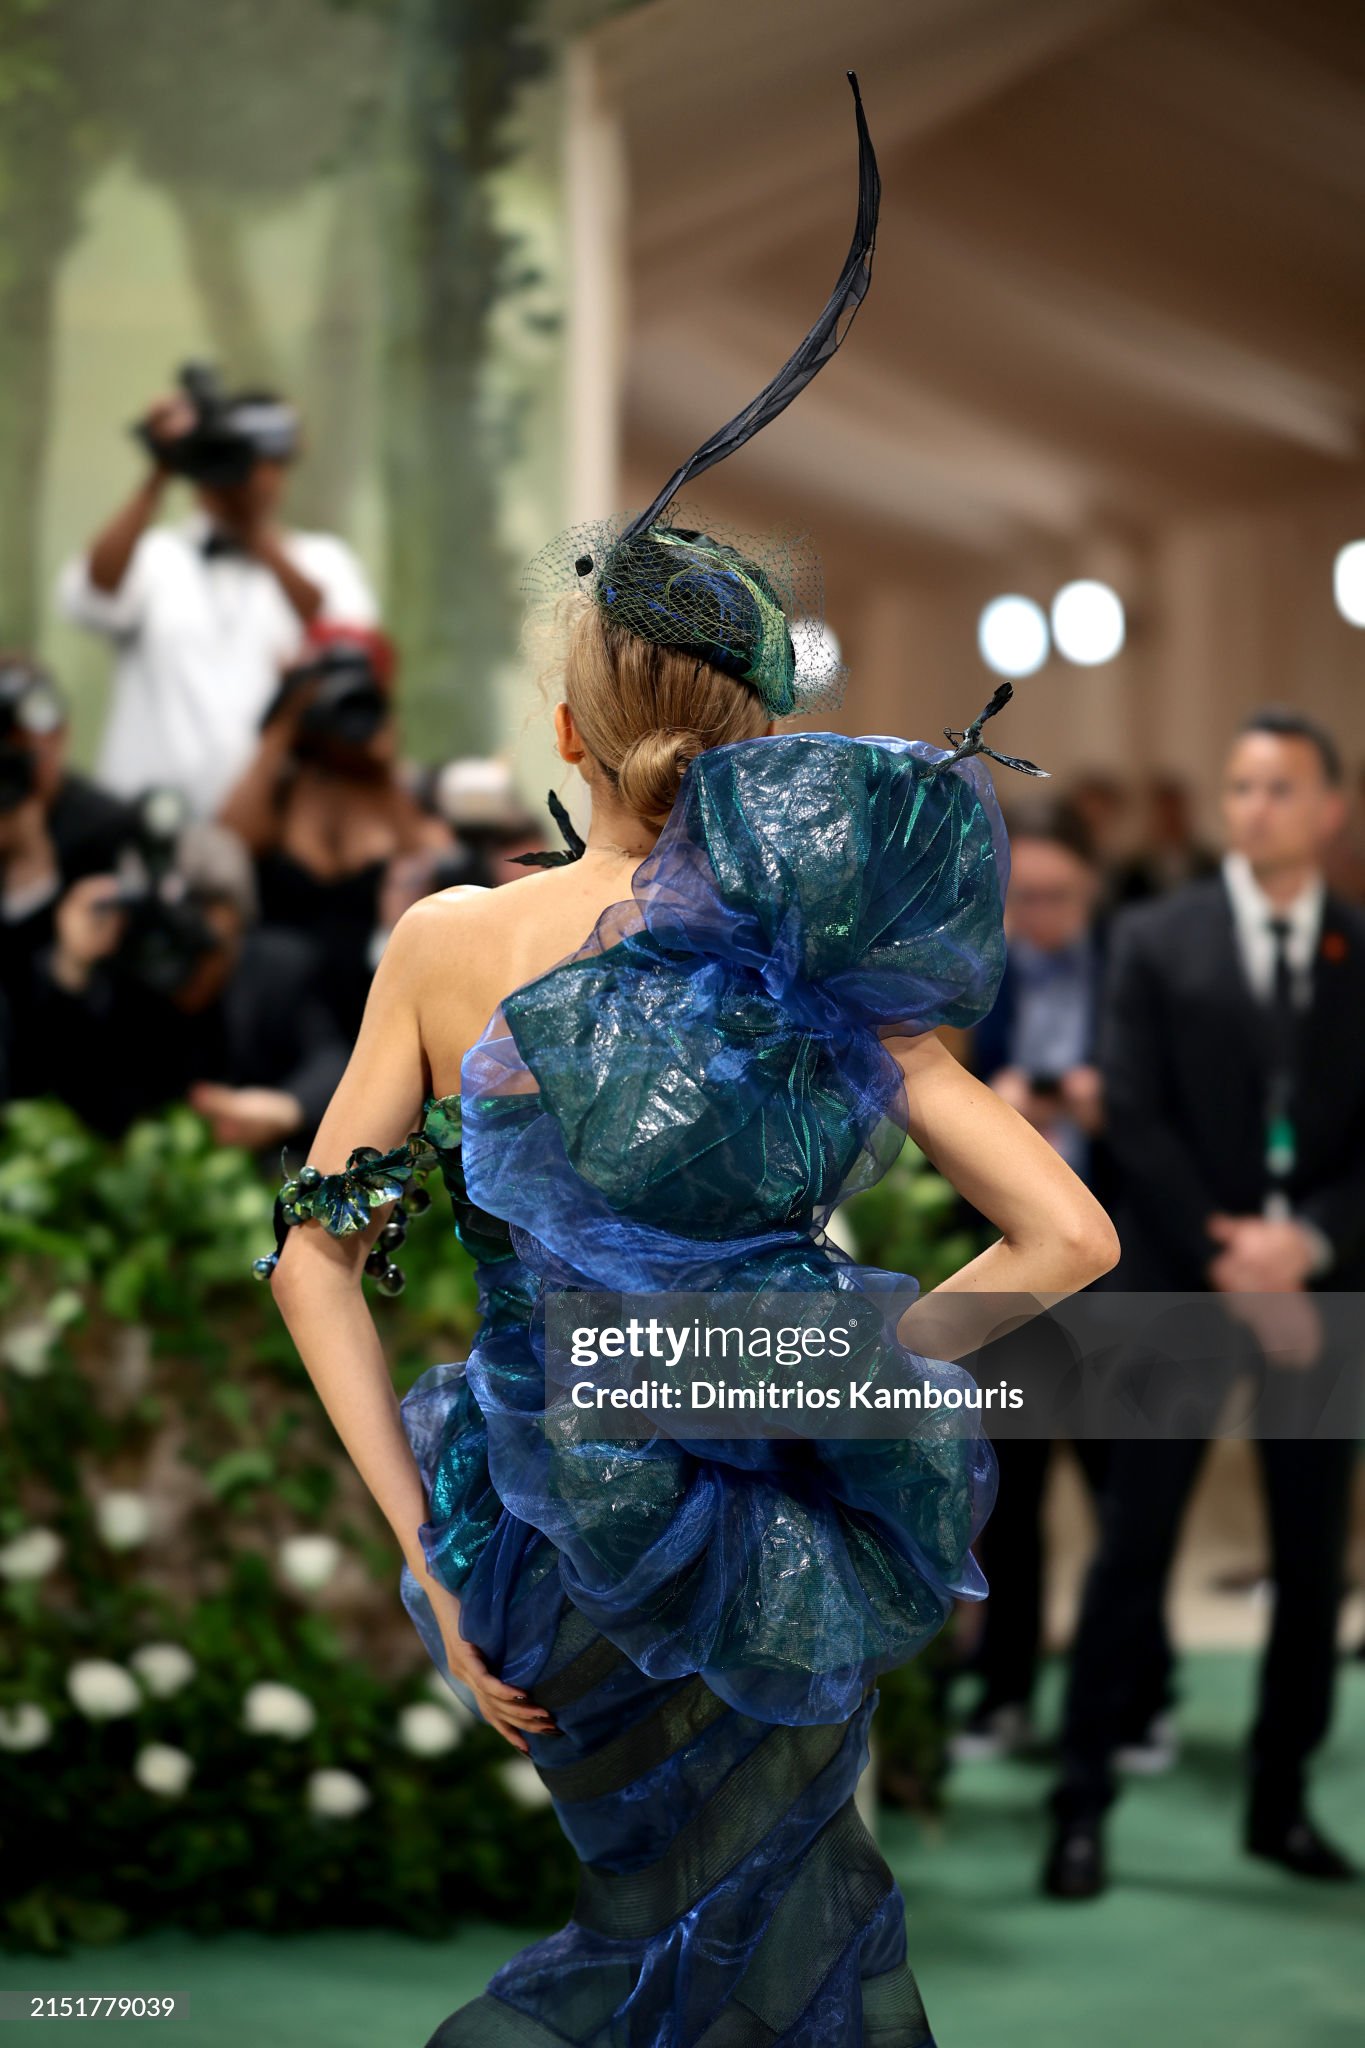 gettyimages-2151779039-2048x2048.jpg